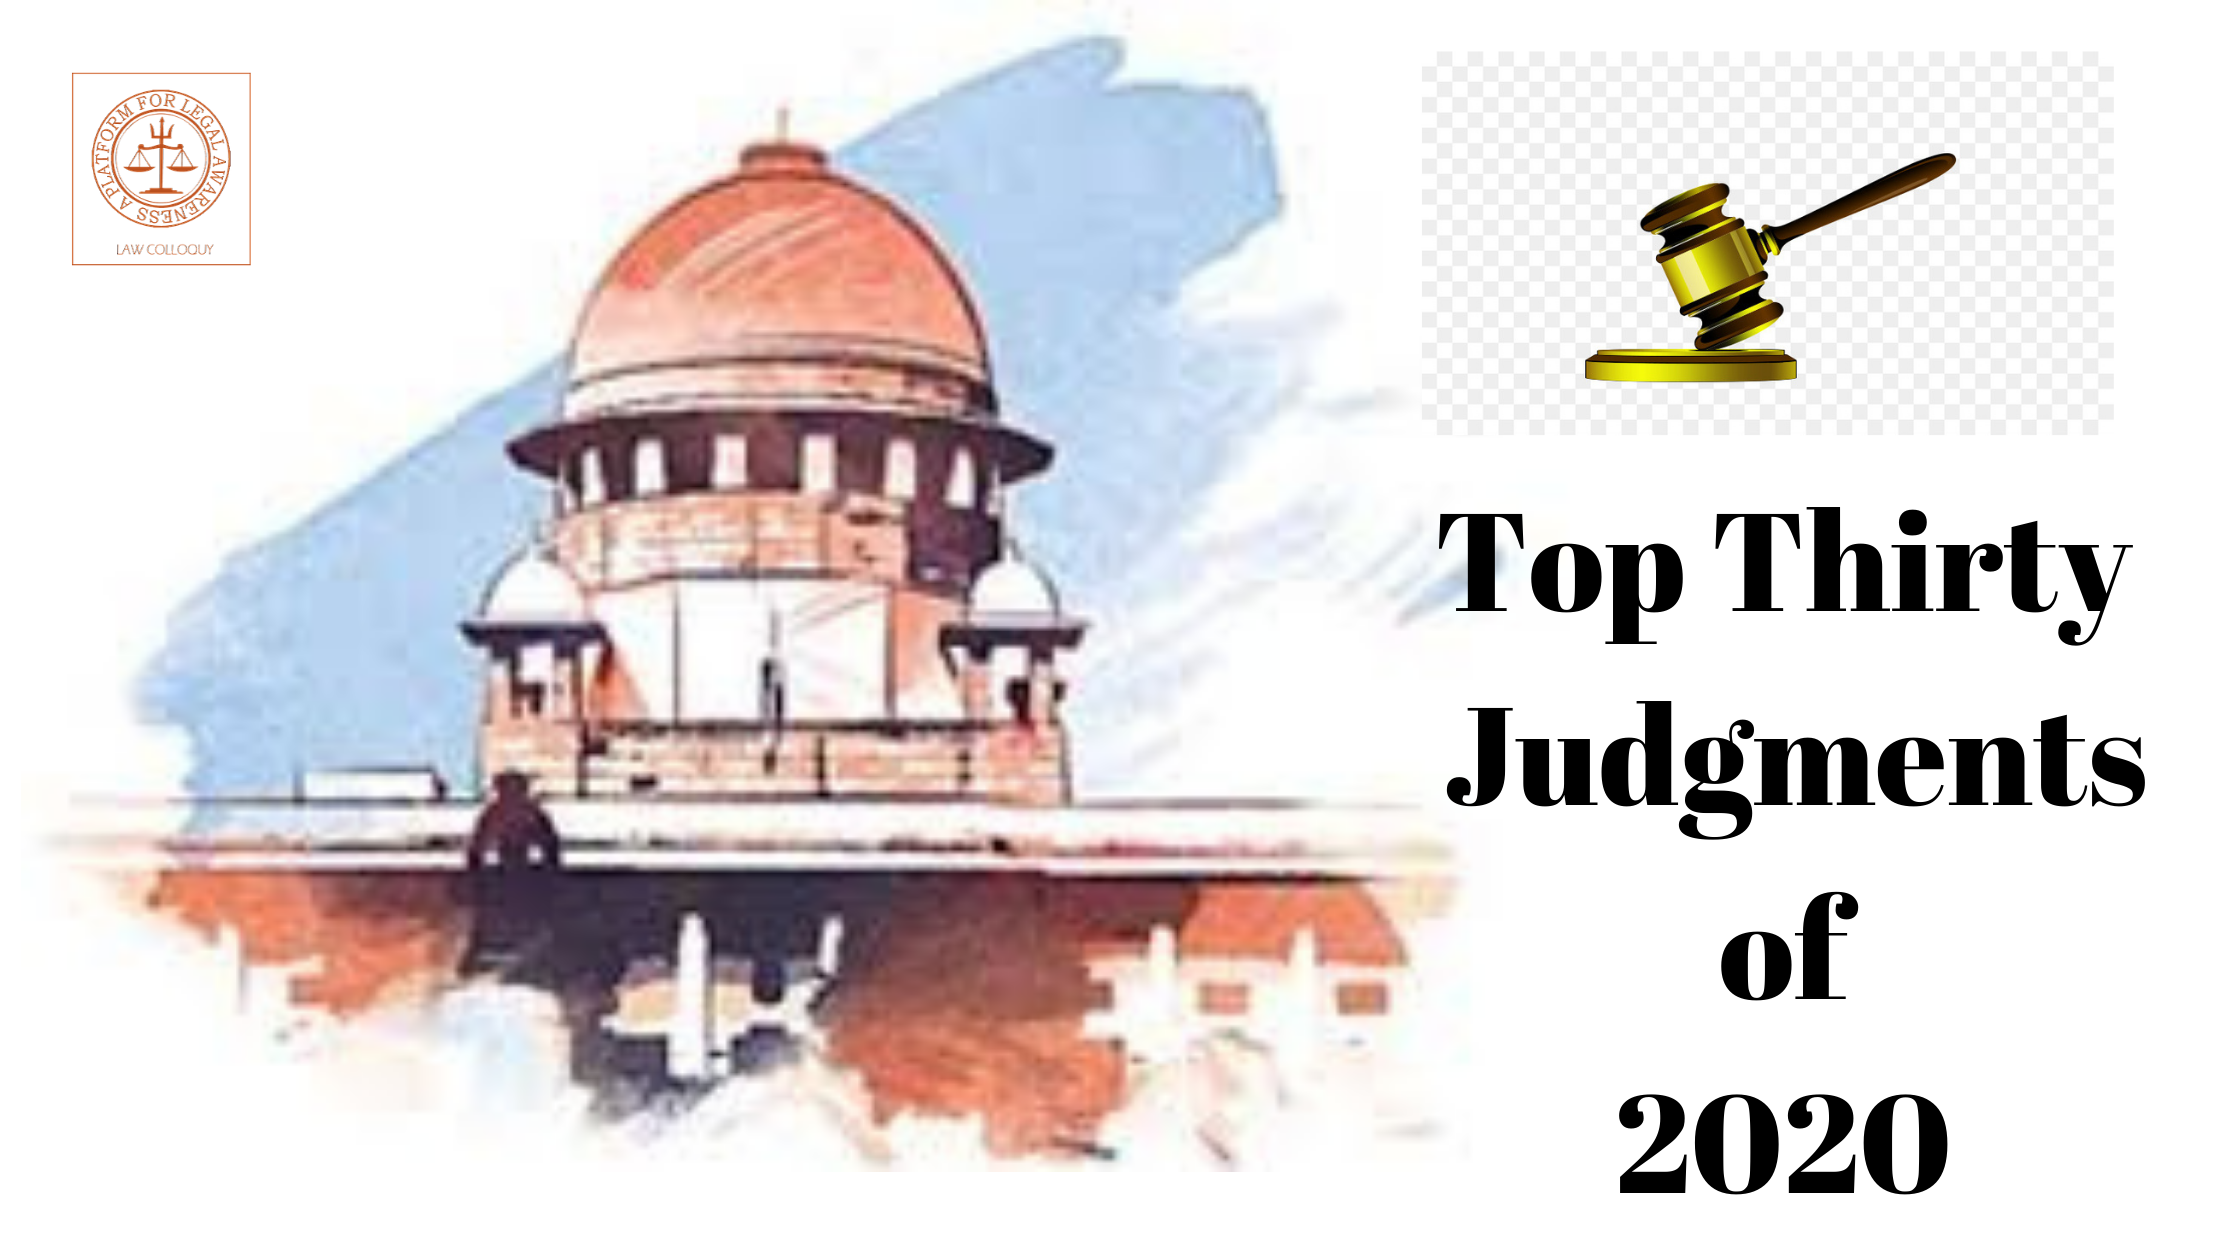 Top Thirty Supreme Court Judgements of India in 2020-2021